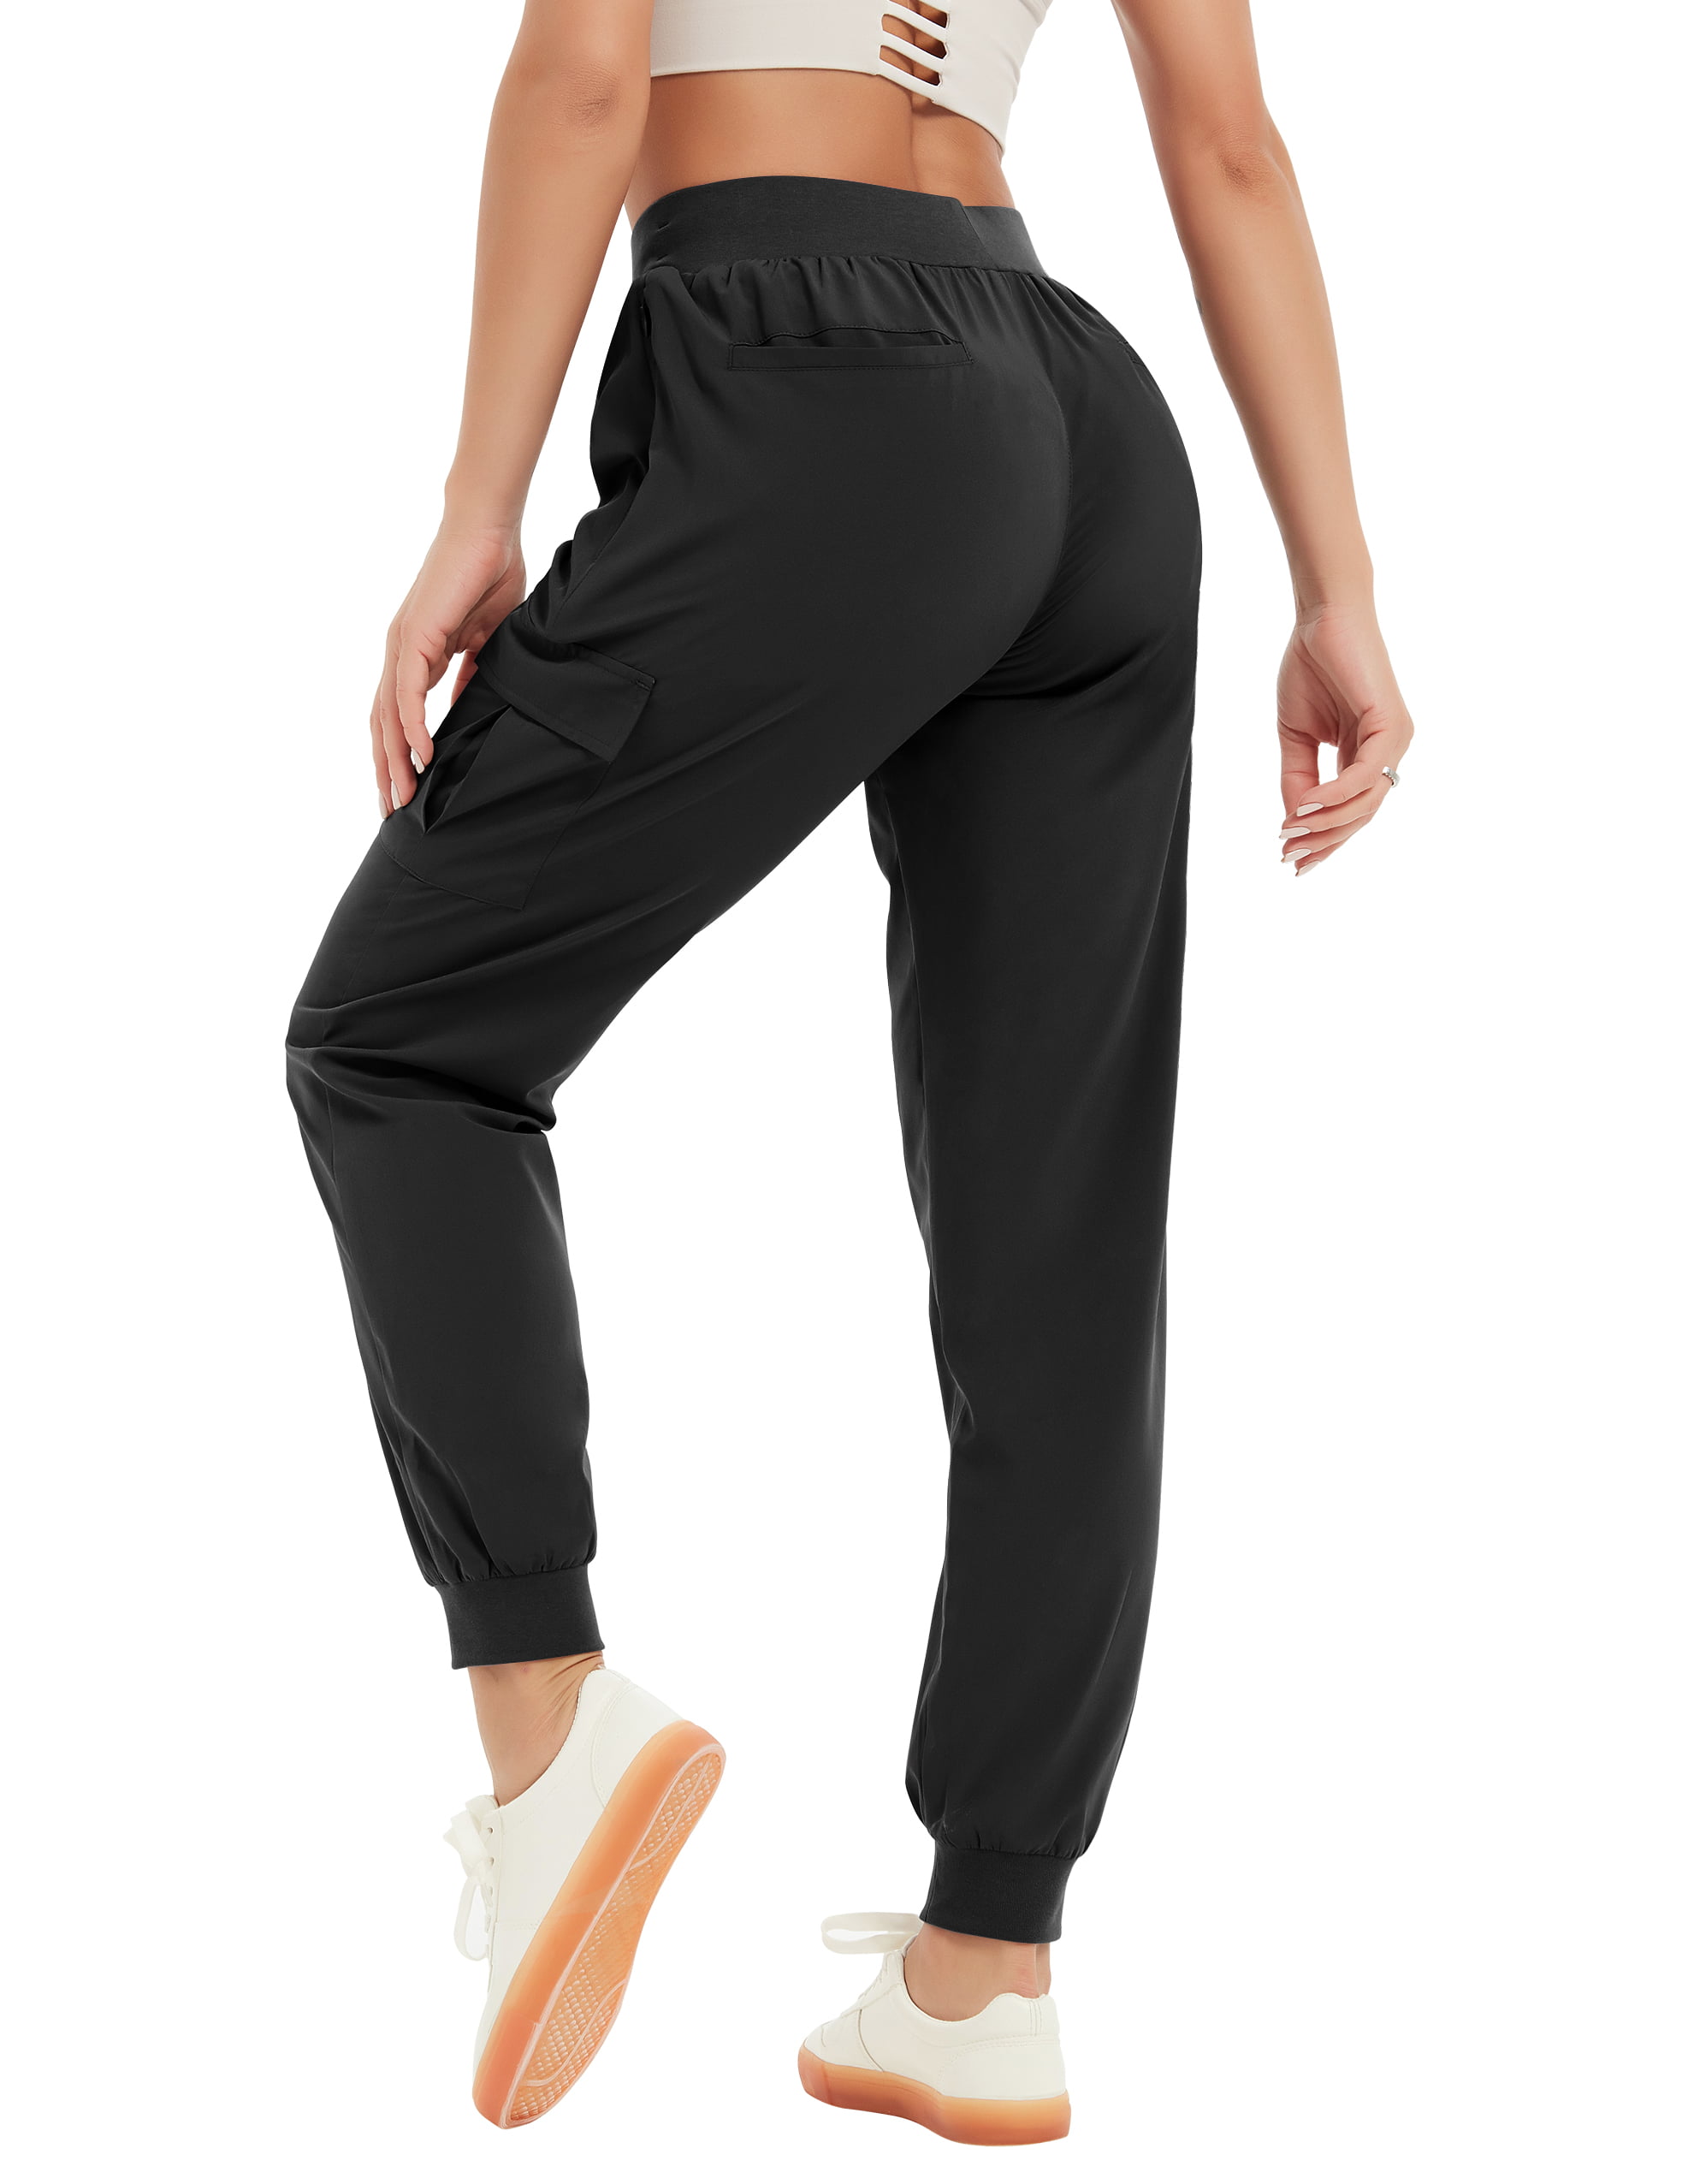 SPECIALMAGIC Womens Joggers Pants Jersey Sweatpants Jogging Lounge Running Yoga Pants with Pockets 